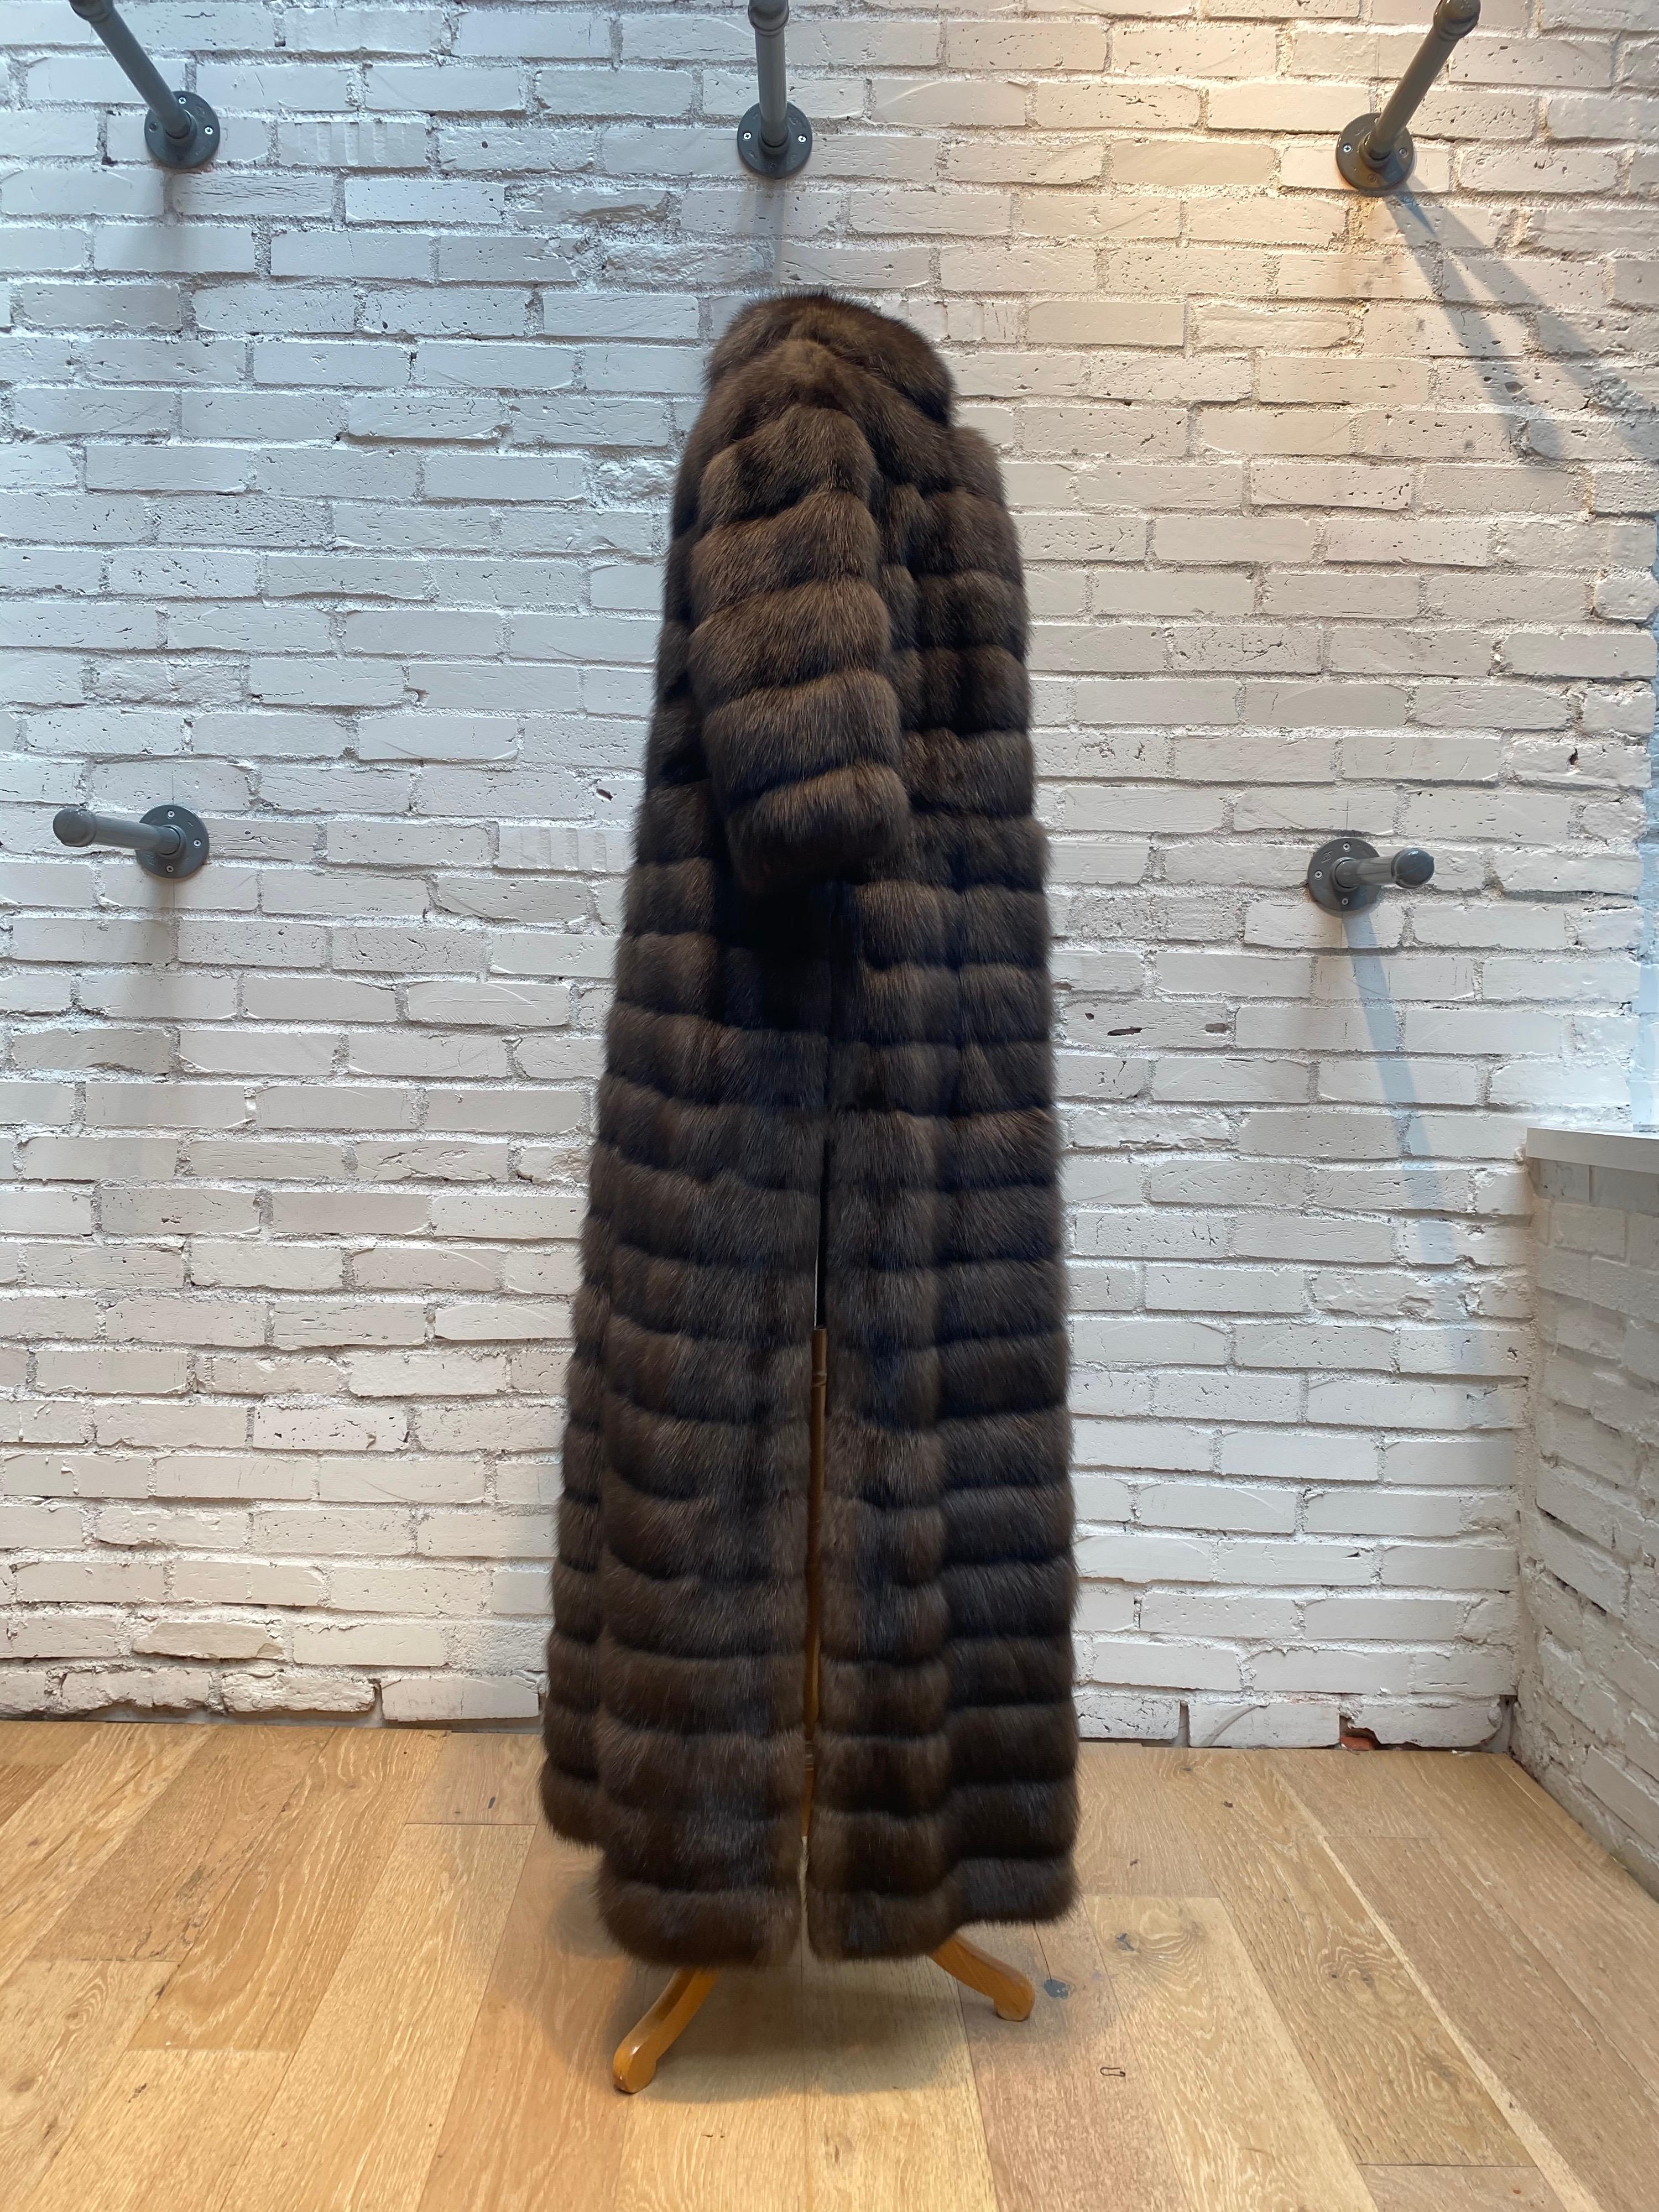 J Mendel 2 piece Sable Mink Fur coat. The top can be worn seperately as a bolero style cropped fur jacket. The bottom like a skirt can be taken off or worn to create a full length fur coat. The whole fur is convertible from full to crop style. One